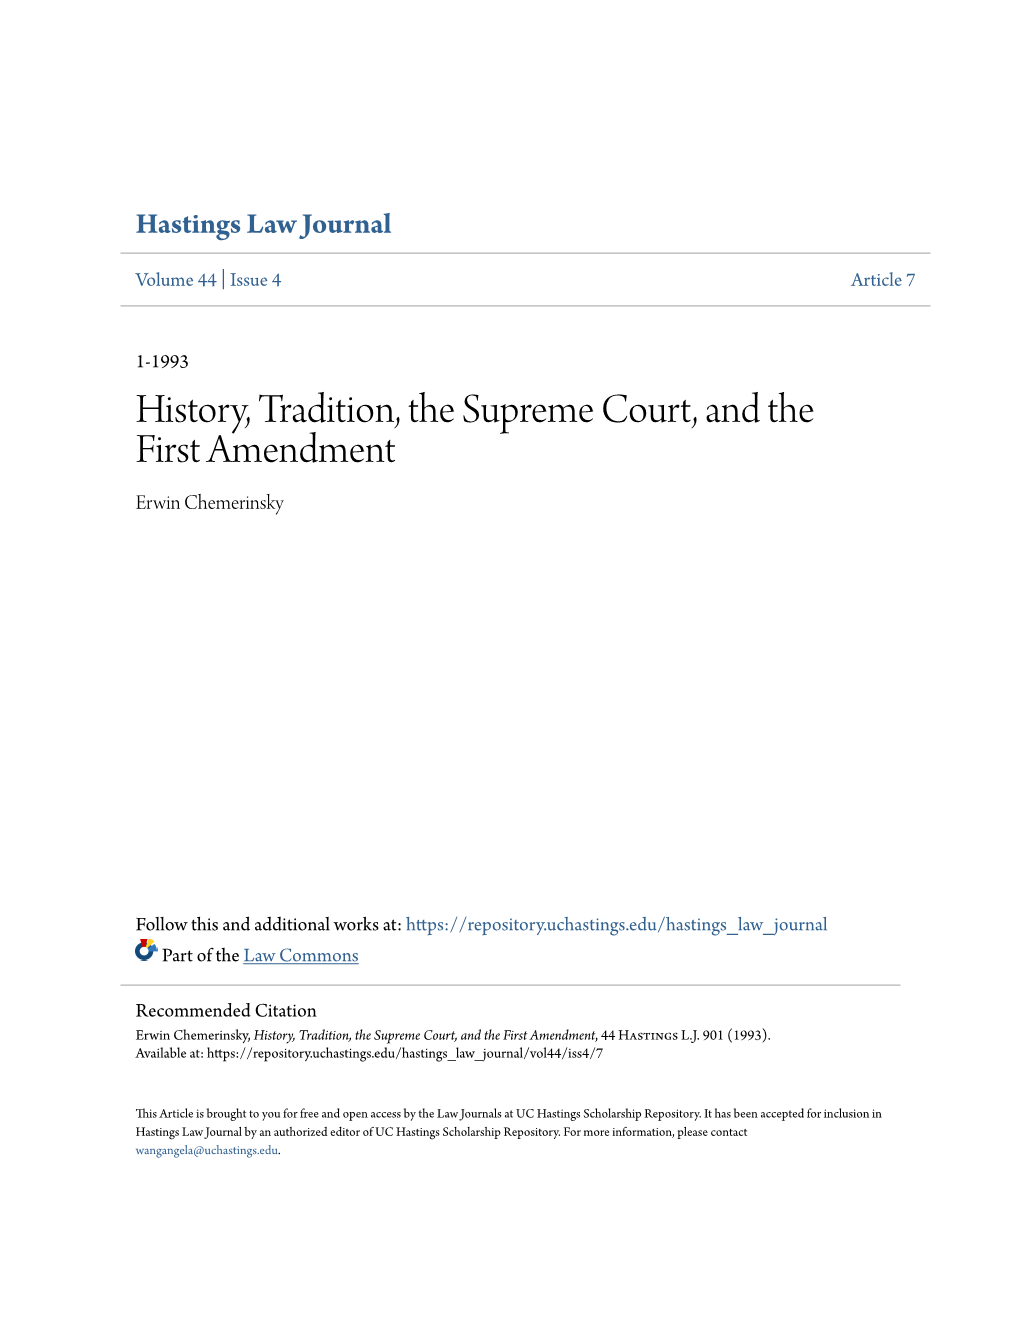 History, Tradition, the Supreme Court, and the First Amendment Erwin Chemerinsky